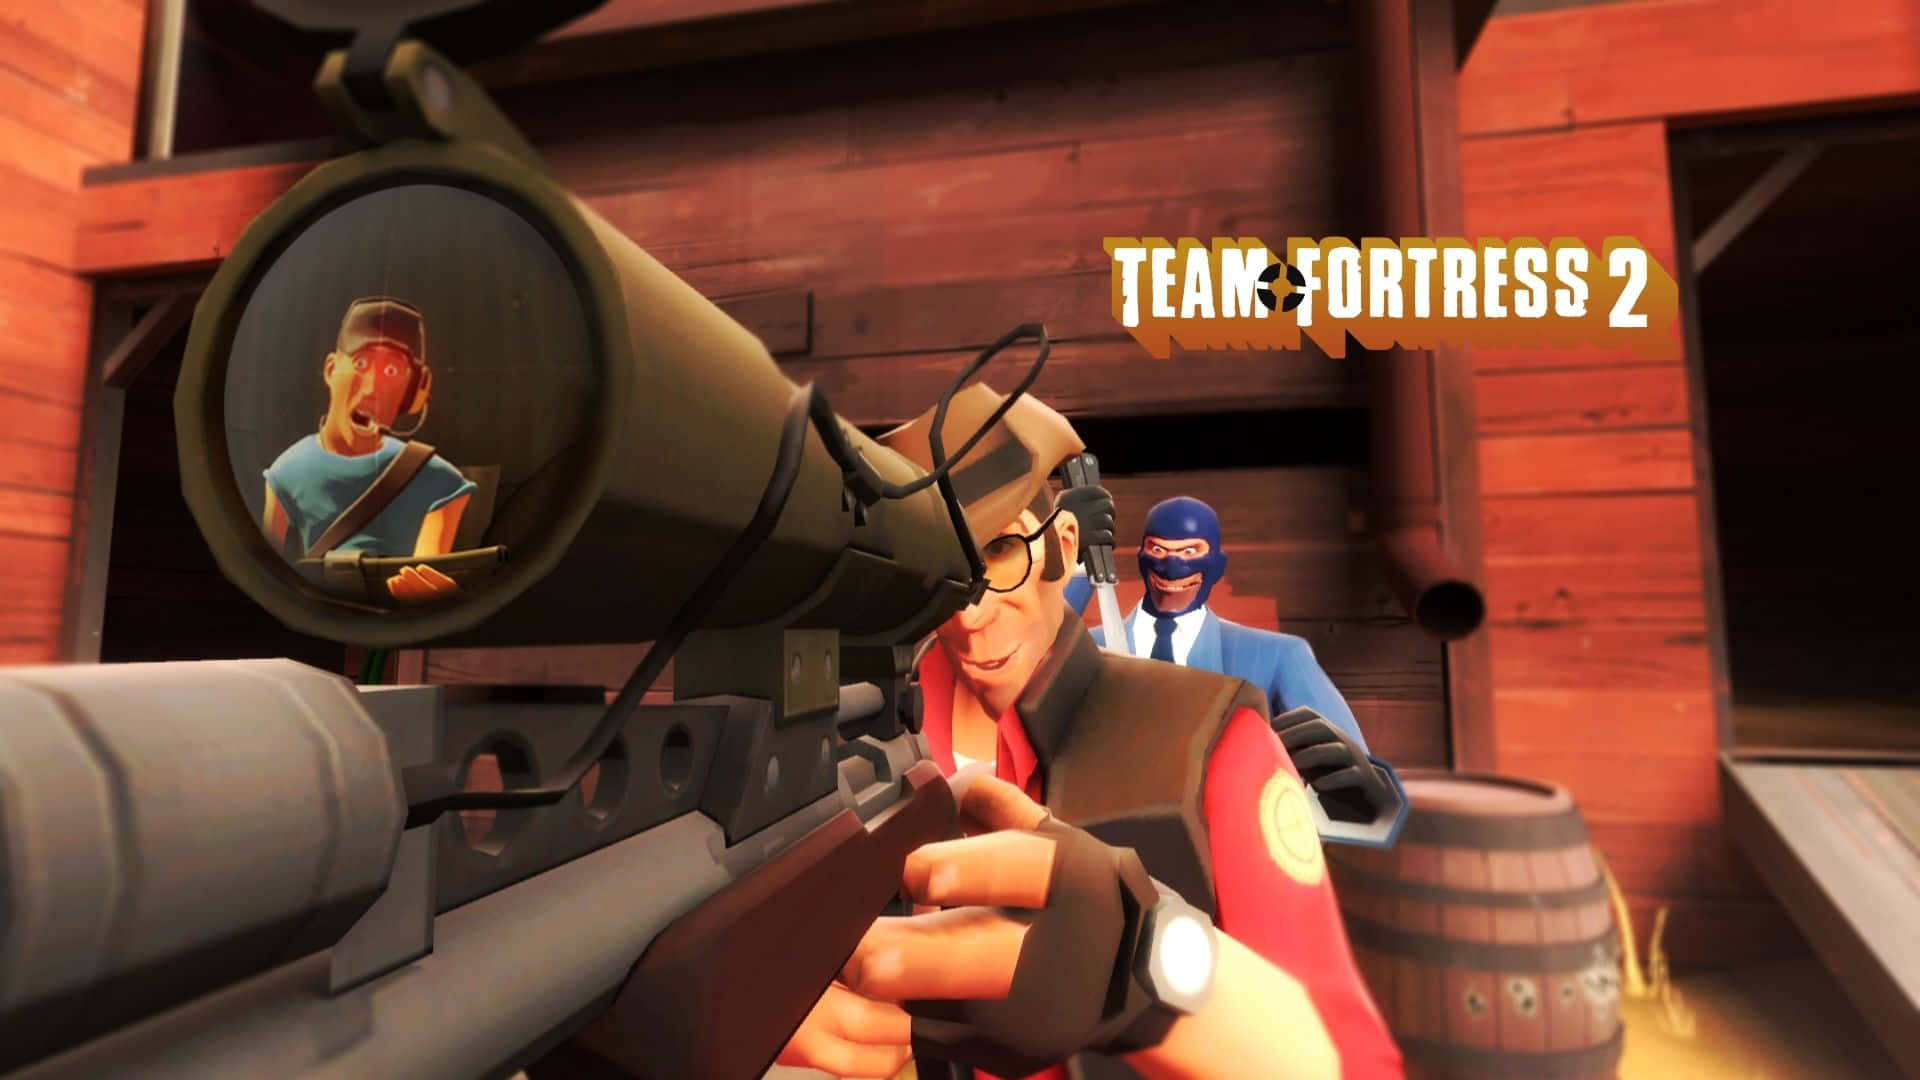 The Best 1920x1080 Team Fortress 2 Wallpaper To Enhance Your Screen